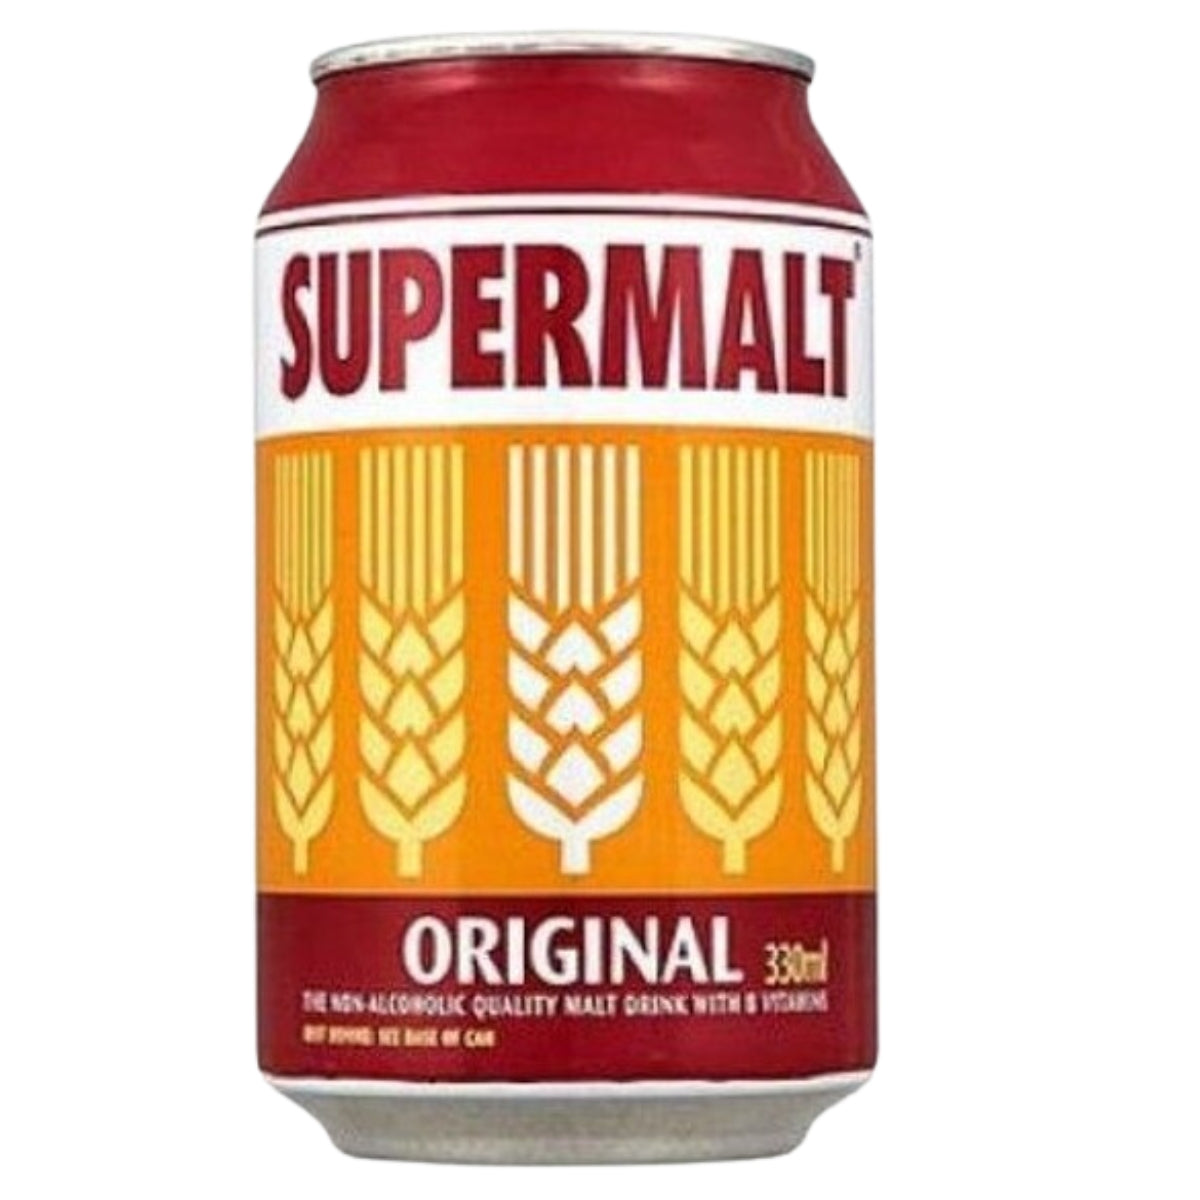 A can of SuperMalt - Original - 330ml on a white background.